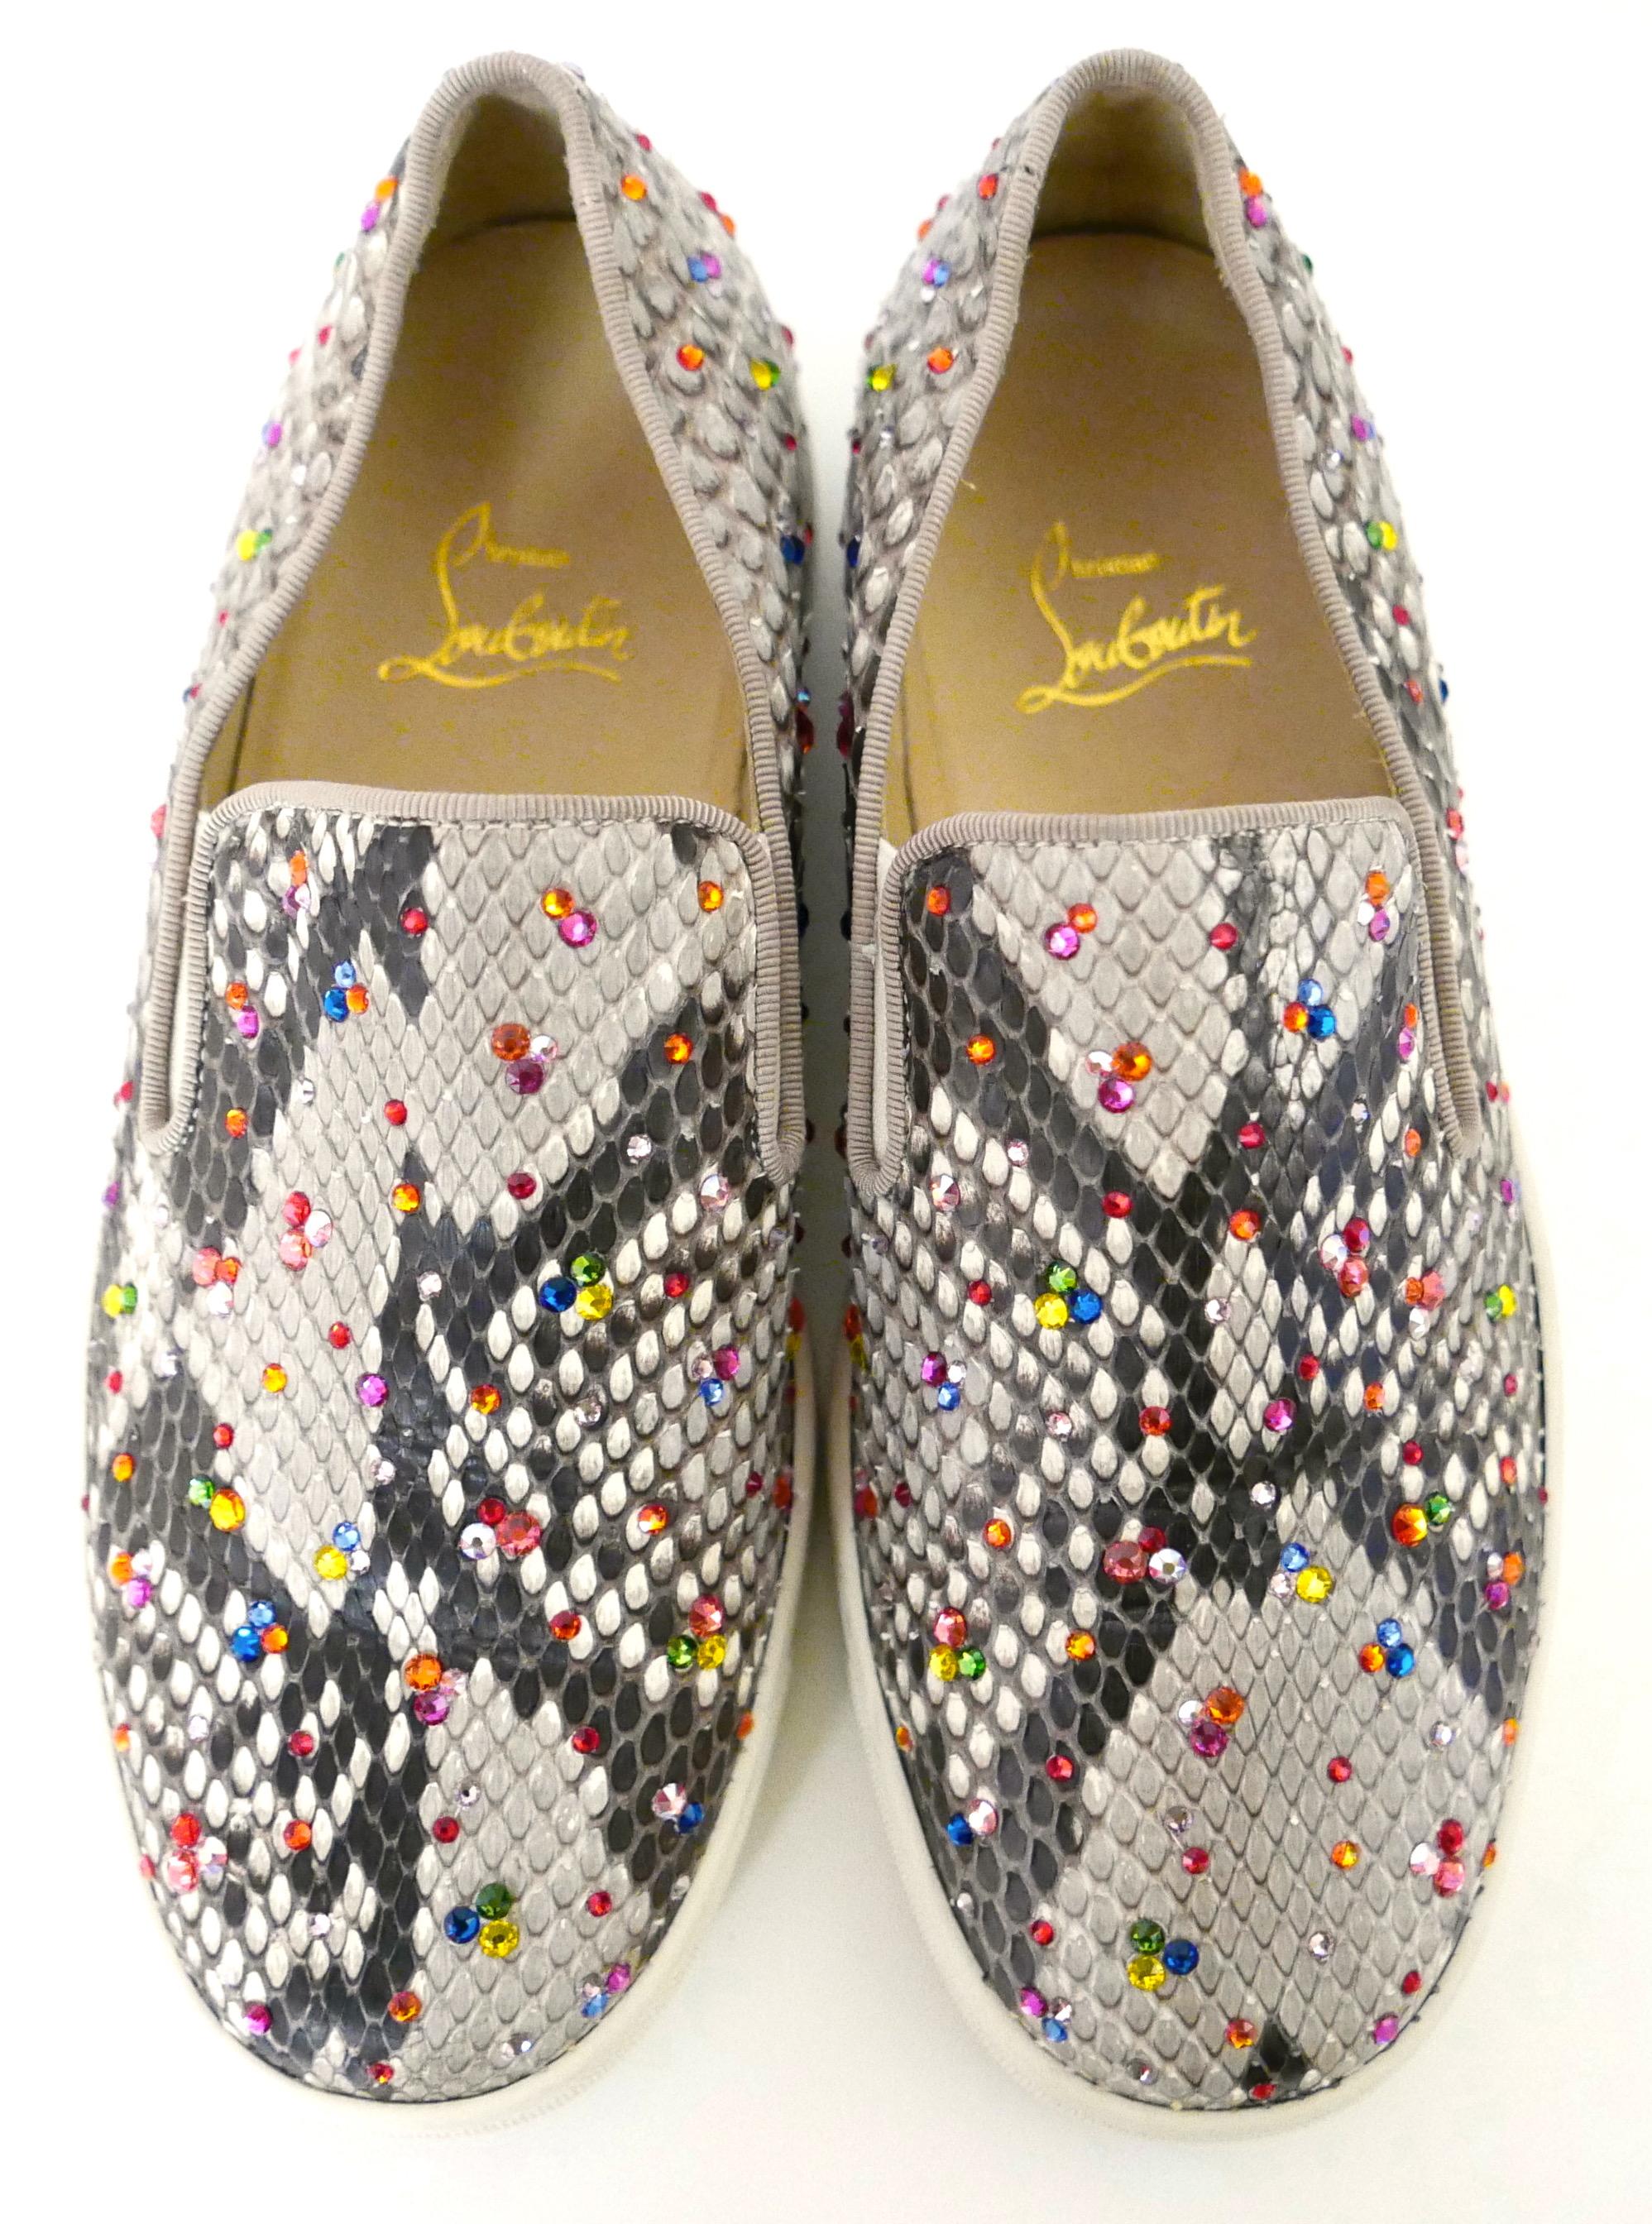 Stunning Christian Louboutin Roller Boat sneakers - bought for $2100 and worn once. Come with single dustbag.

Made from beautifully snake leather which is dusted with a rainbow of sparkling different sized crystals. They have 
thick off white and